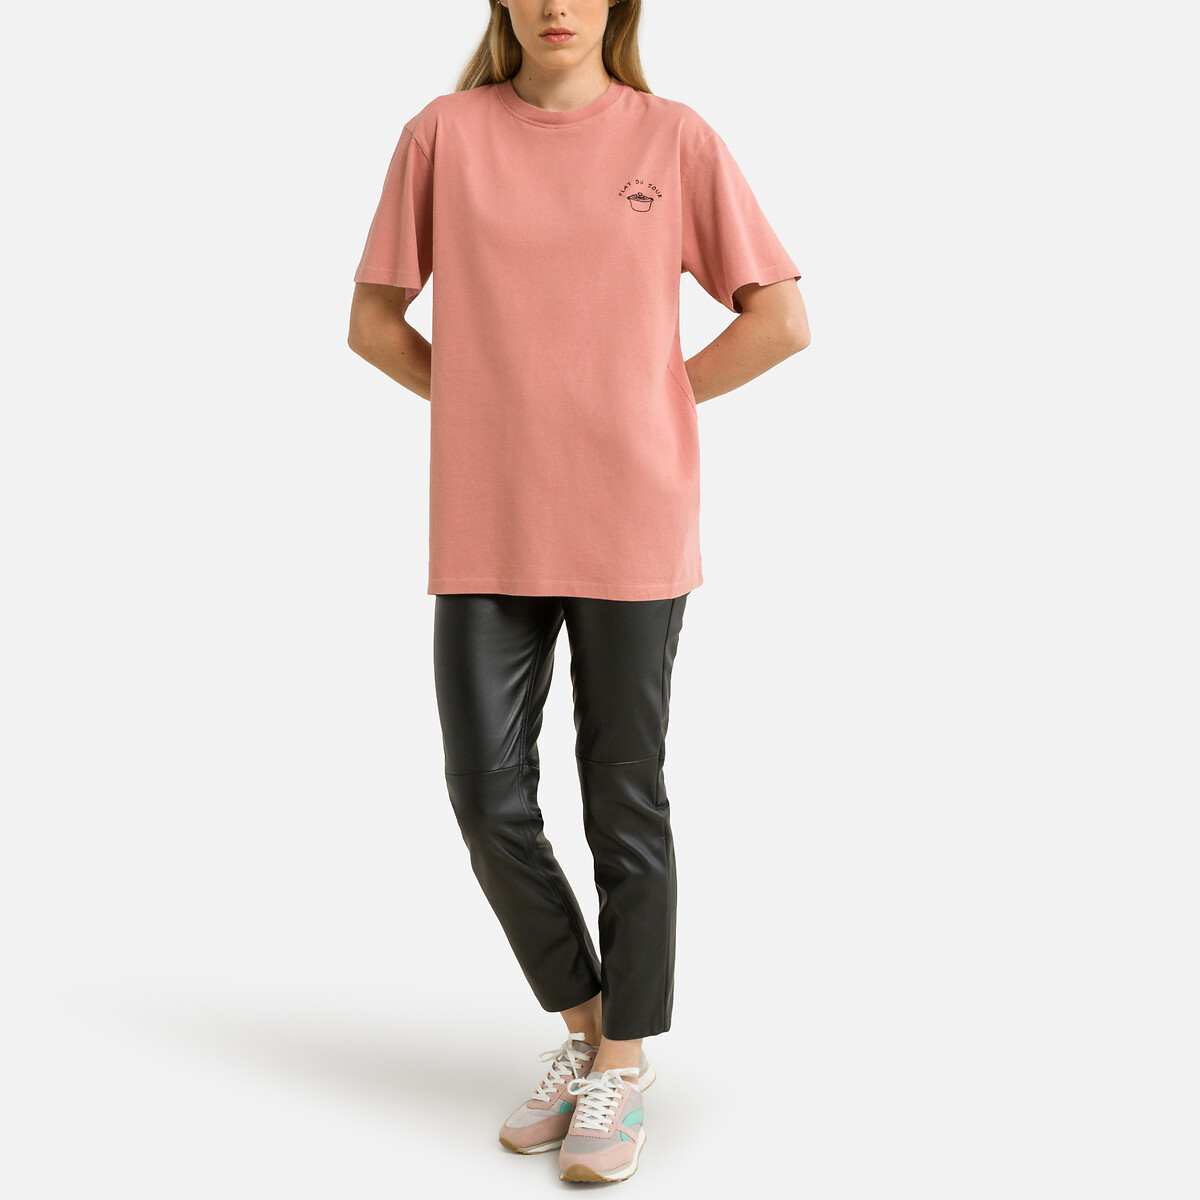 Bainville Organic Cotton T-Shirt with Back Print and Short Sleeves